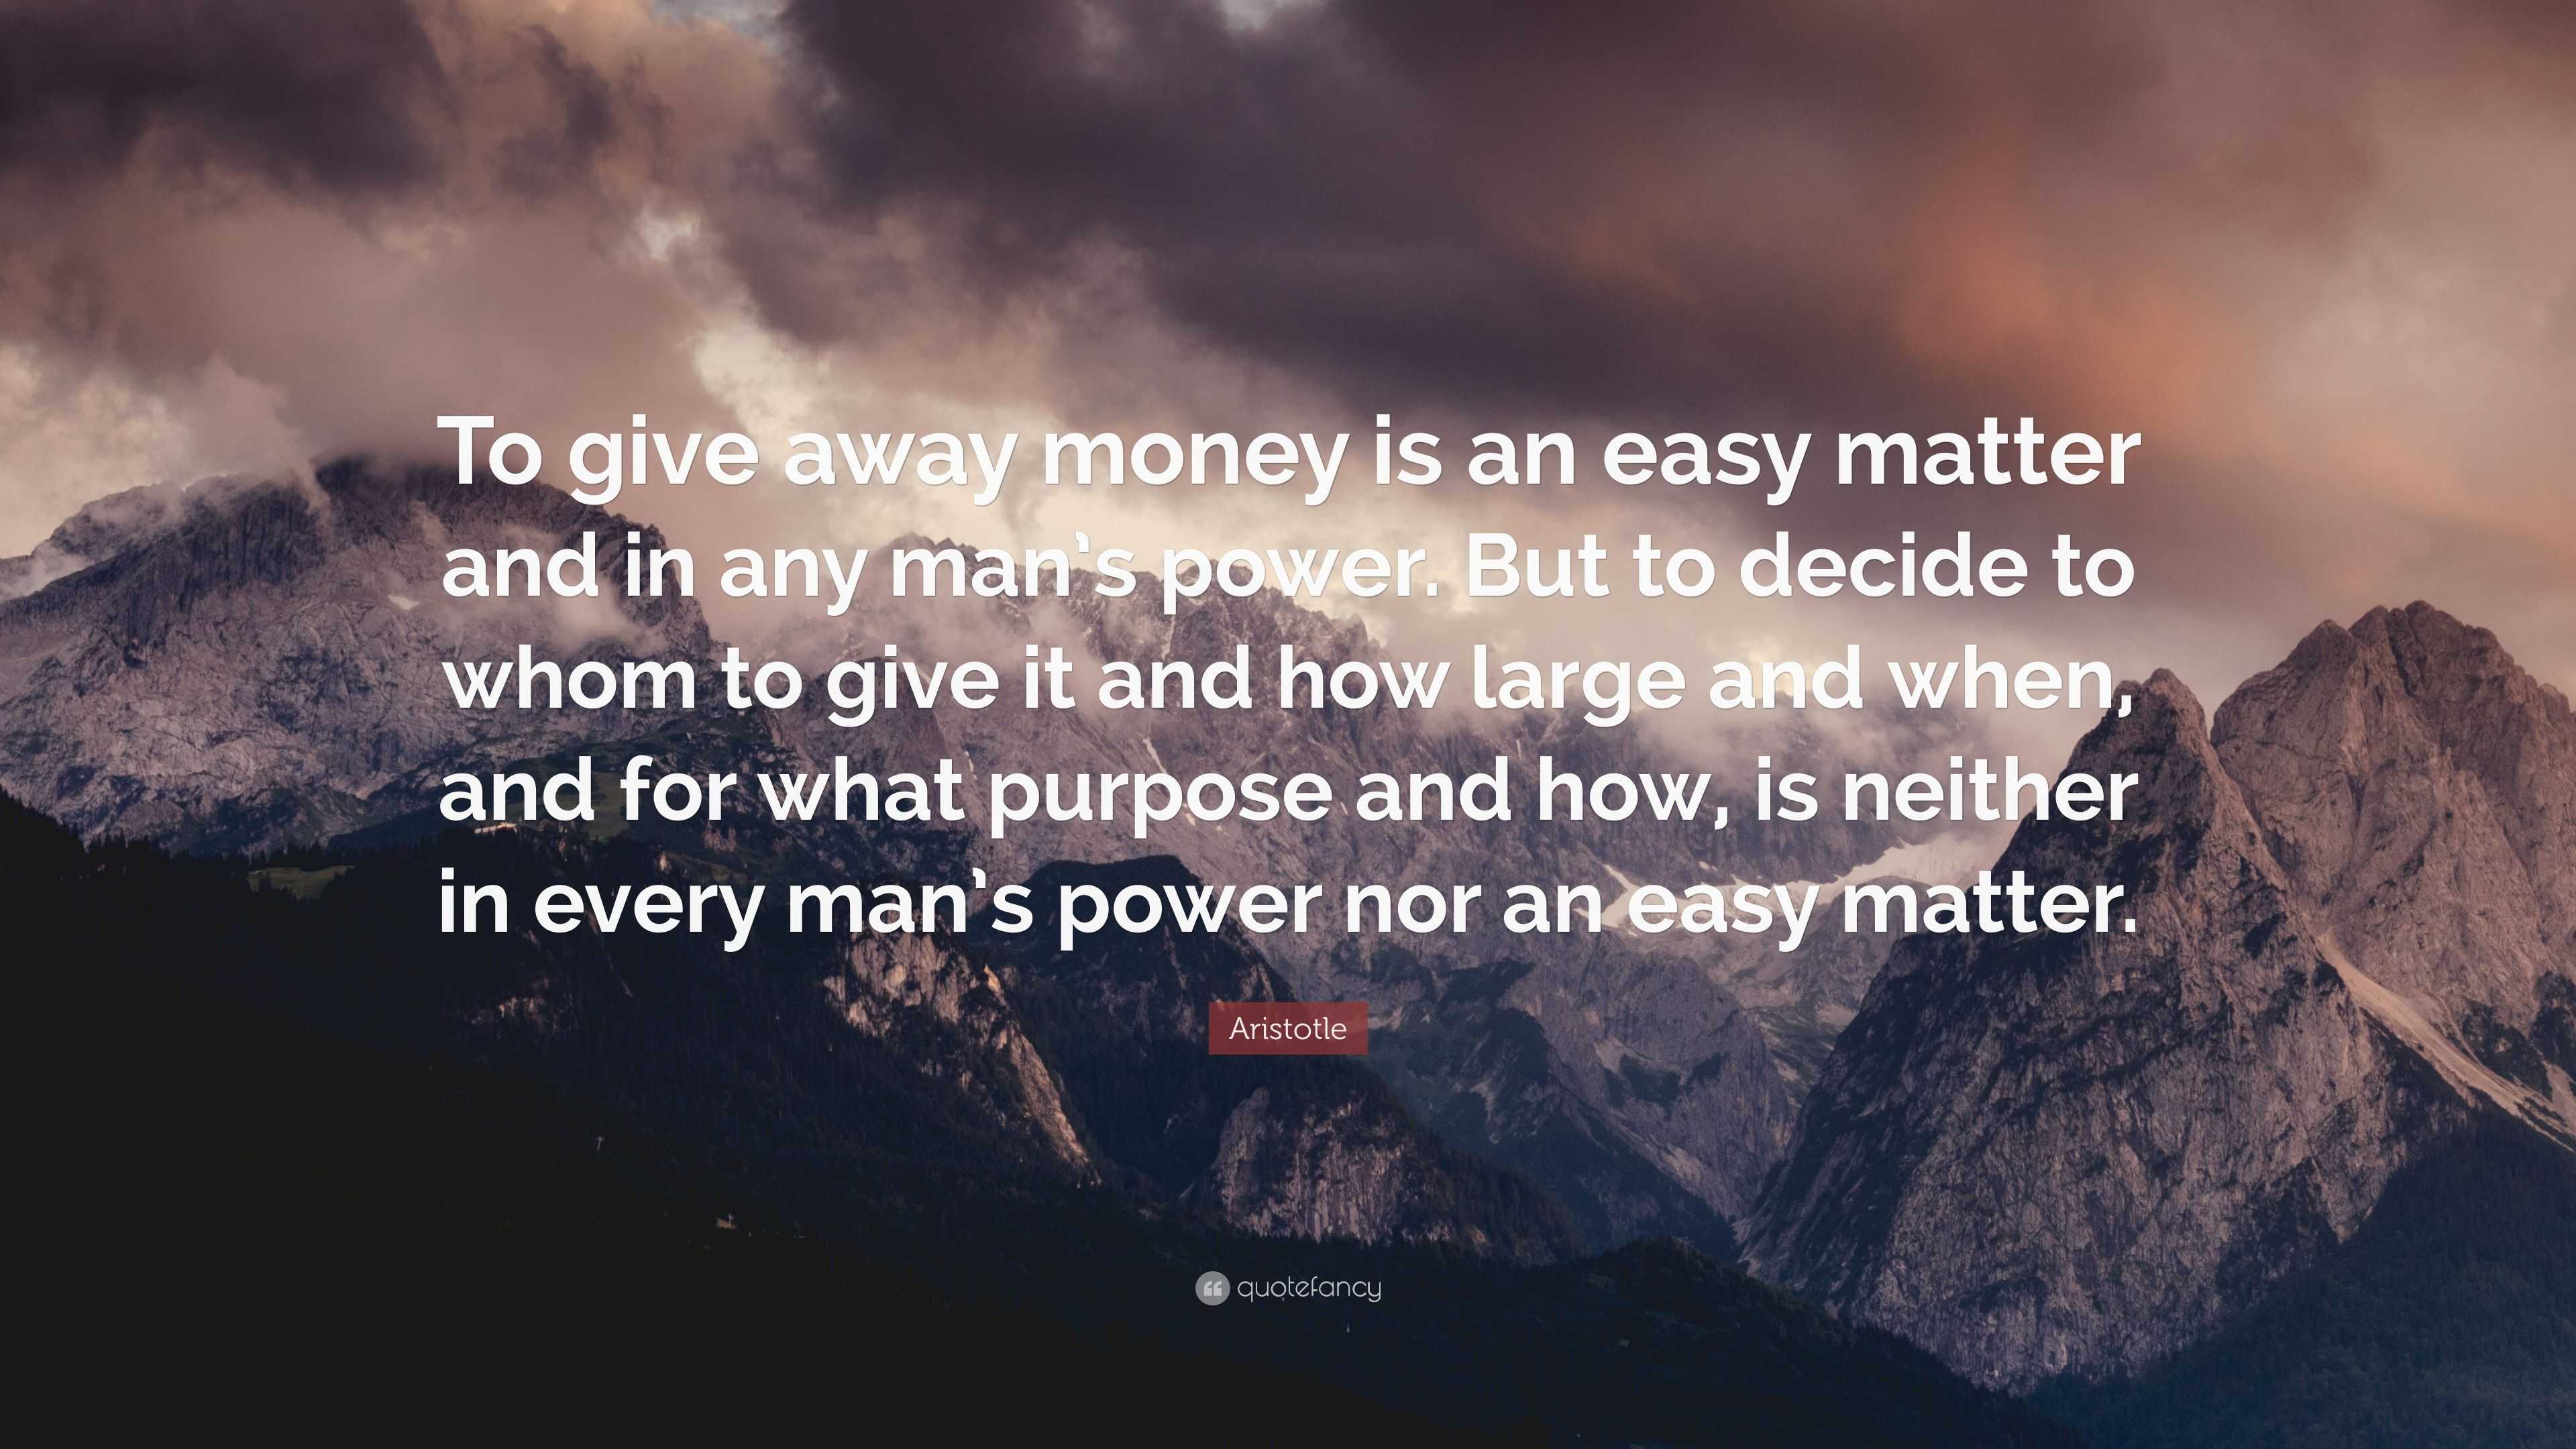 Aristotle Quote: "To give away money is an easy matter and in any man's power. But to decide to ...